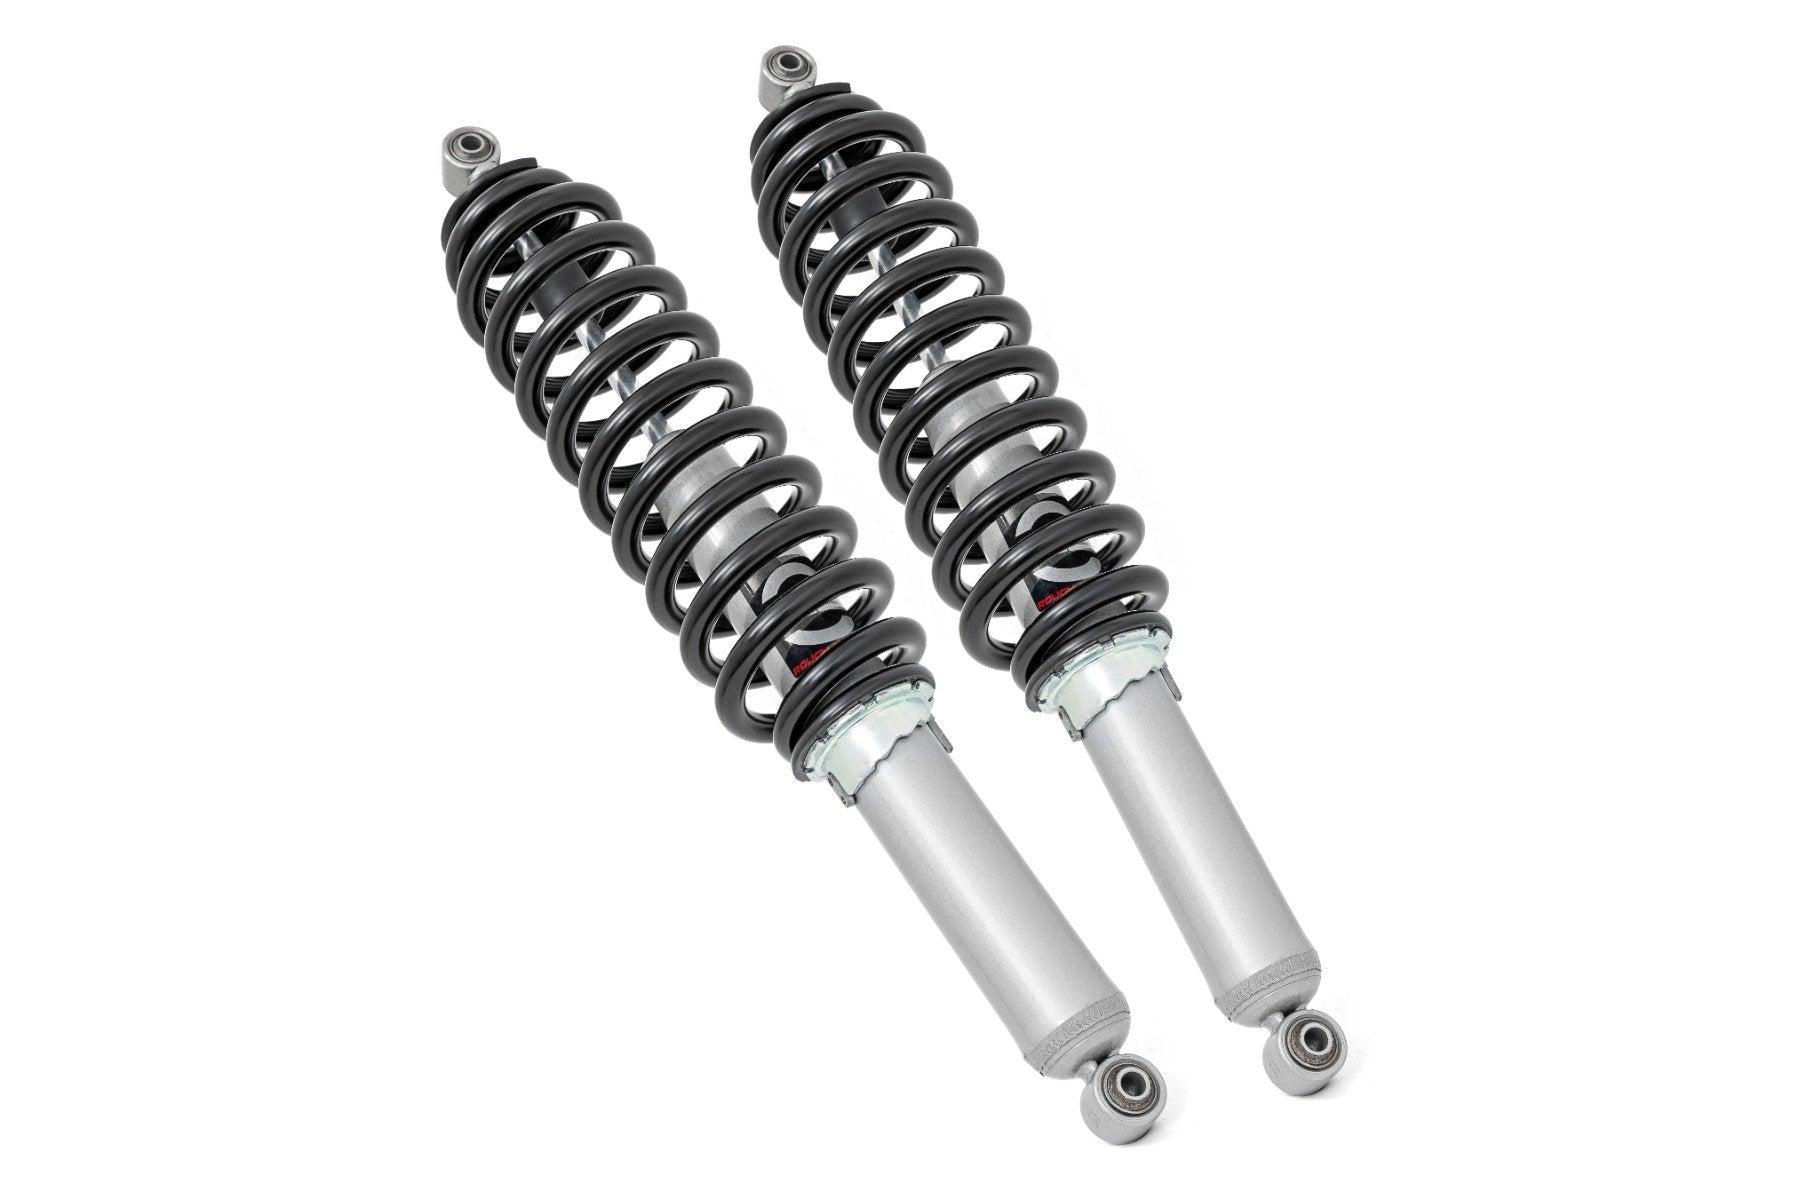 Ranger – Extreme | Polaris Rear Over | Coil & Offroad N3 Shocks Performance Stock